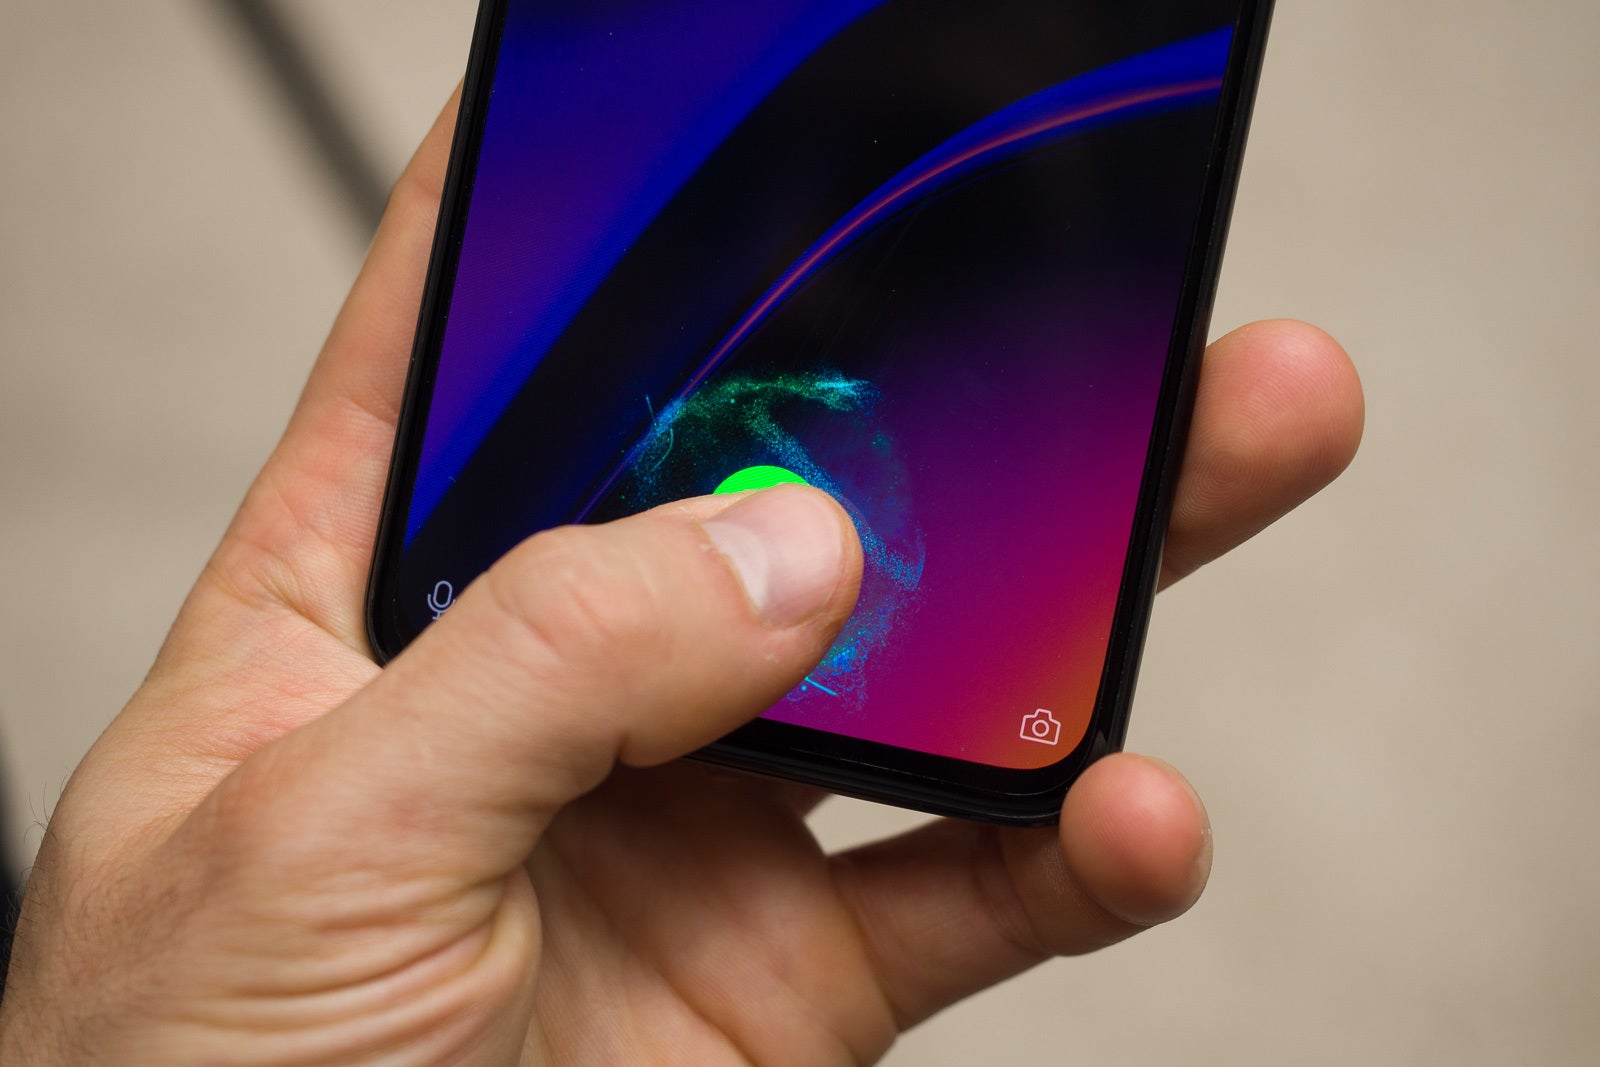 The OnePlus 6T is getting a decent price cut in the US